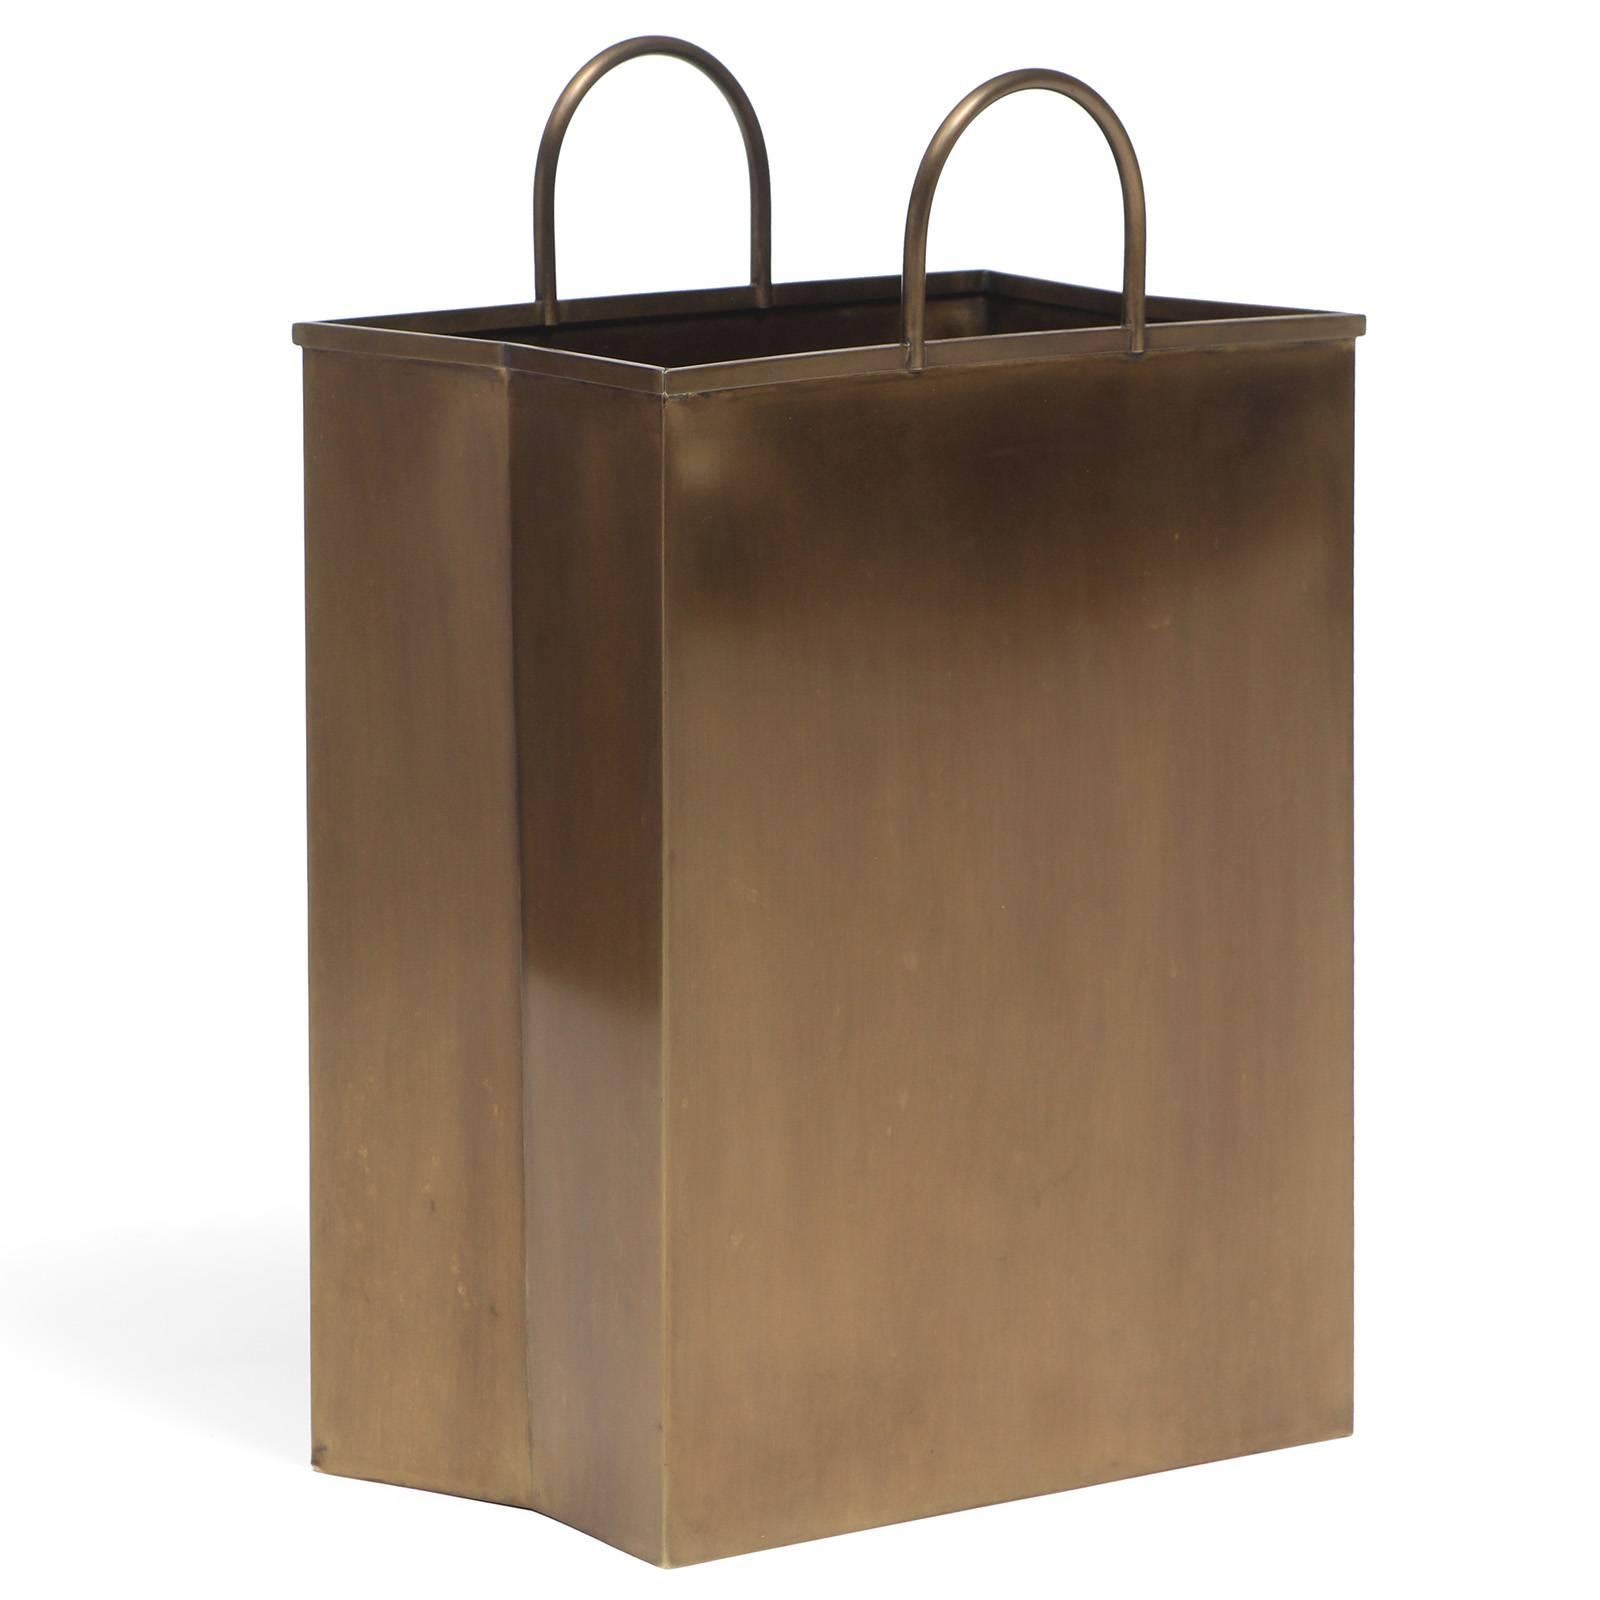 An expressive and finely constructed brass waste baskets in the form of pleated shopping bags. Small basket is 6.5